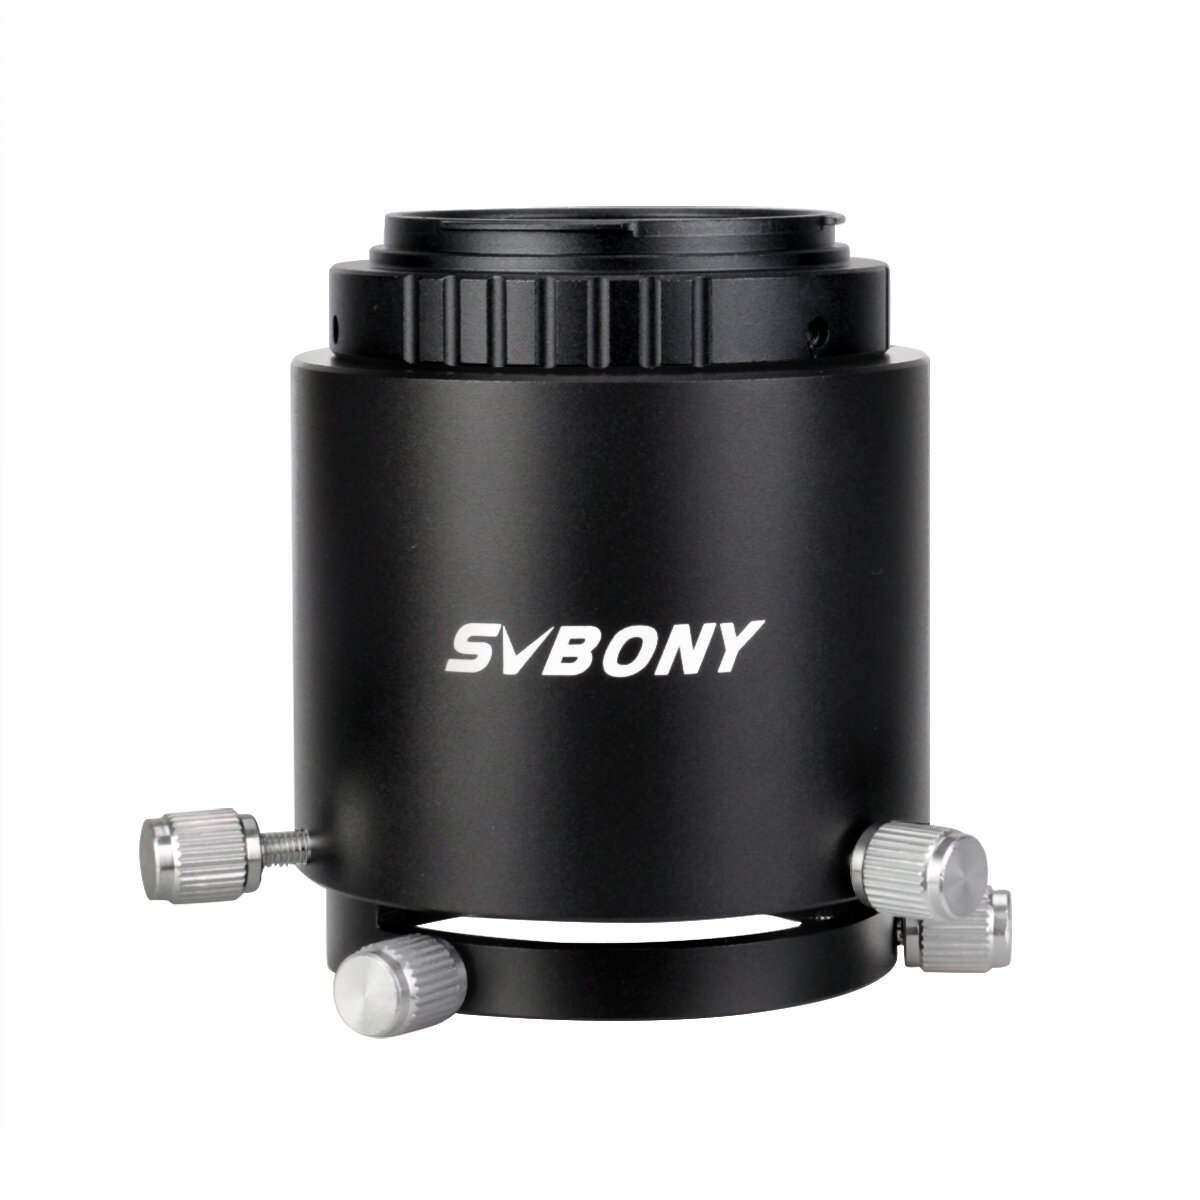 

SVBONY Spotting Scope Camera Adapter Extensionable Two Tube Construction Fits Spotting Scope Eyepiece Outer Diameter 49m